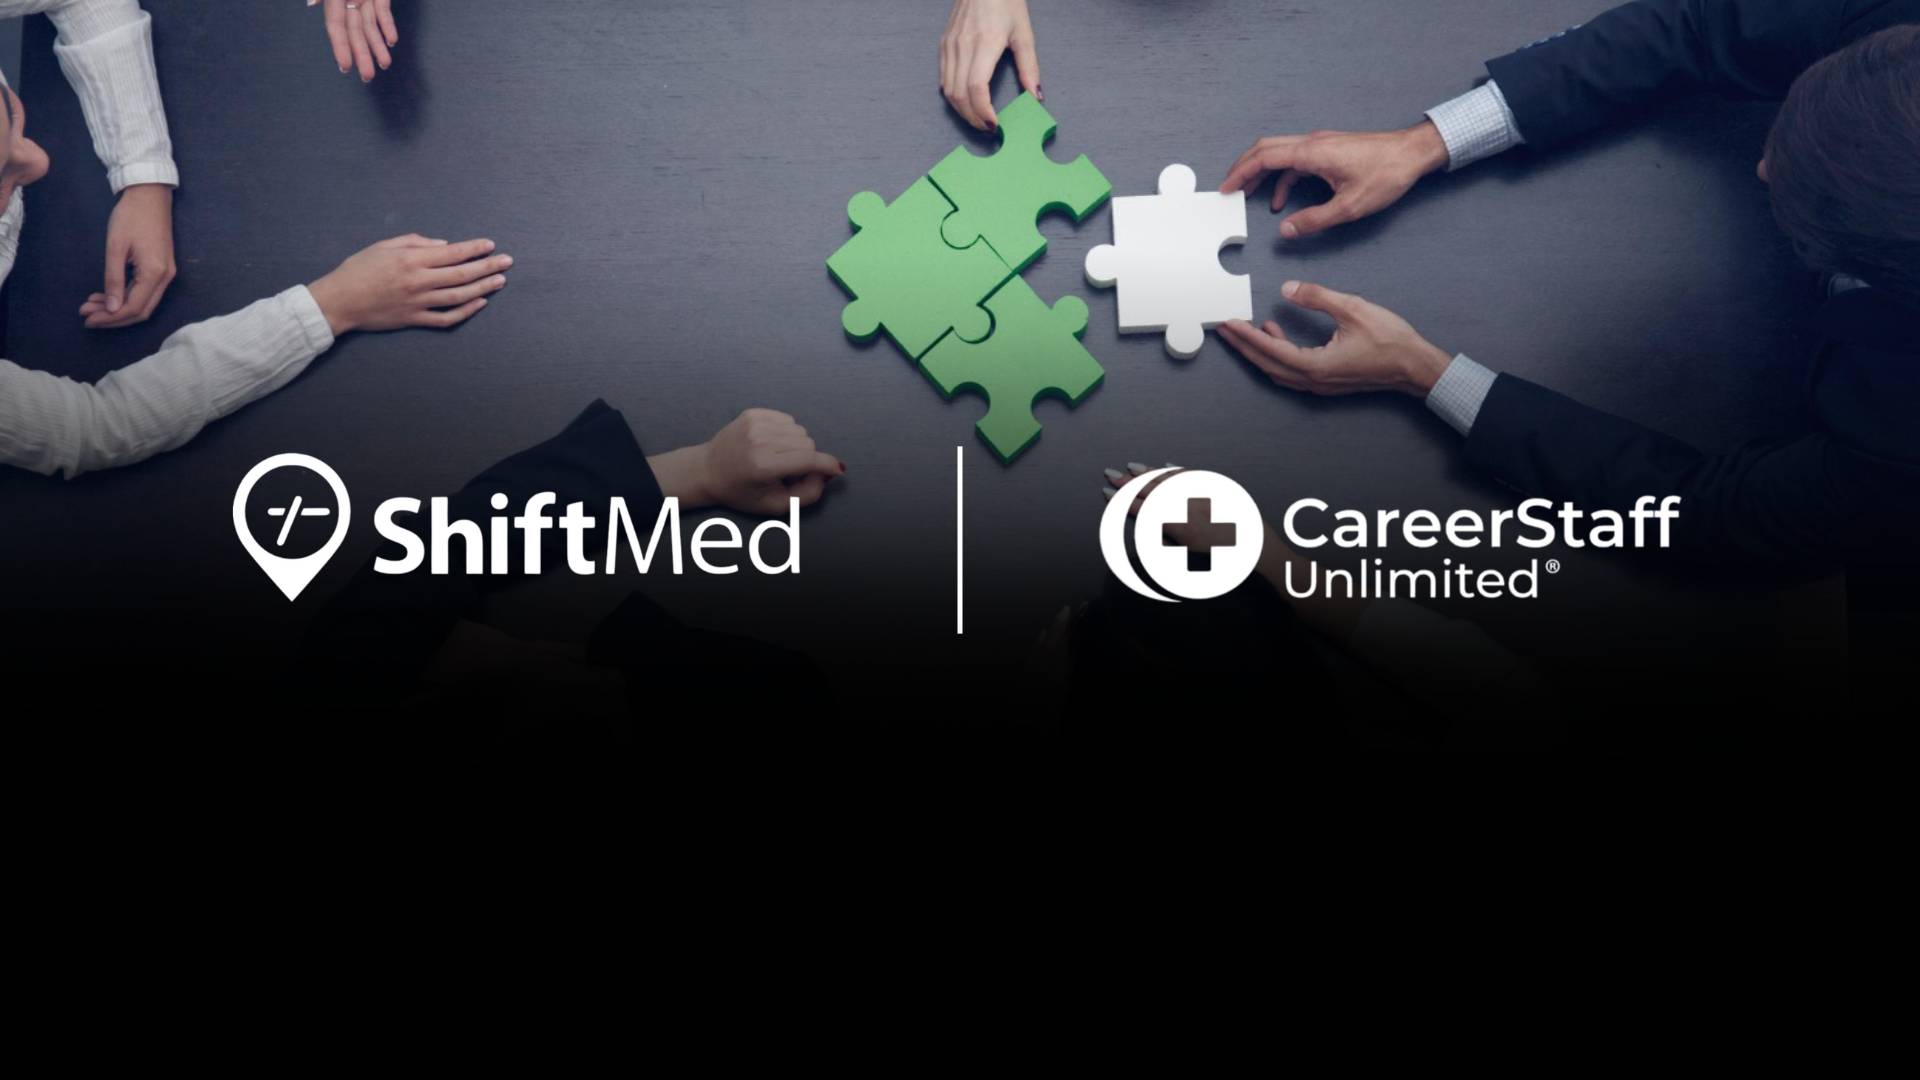 "ShiftMed Acquires CareerStaff Unlimited: A Game-Changer in Healthcare Workforce Technology"